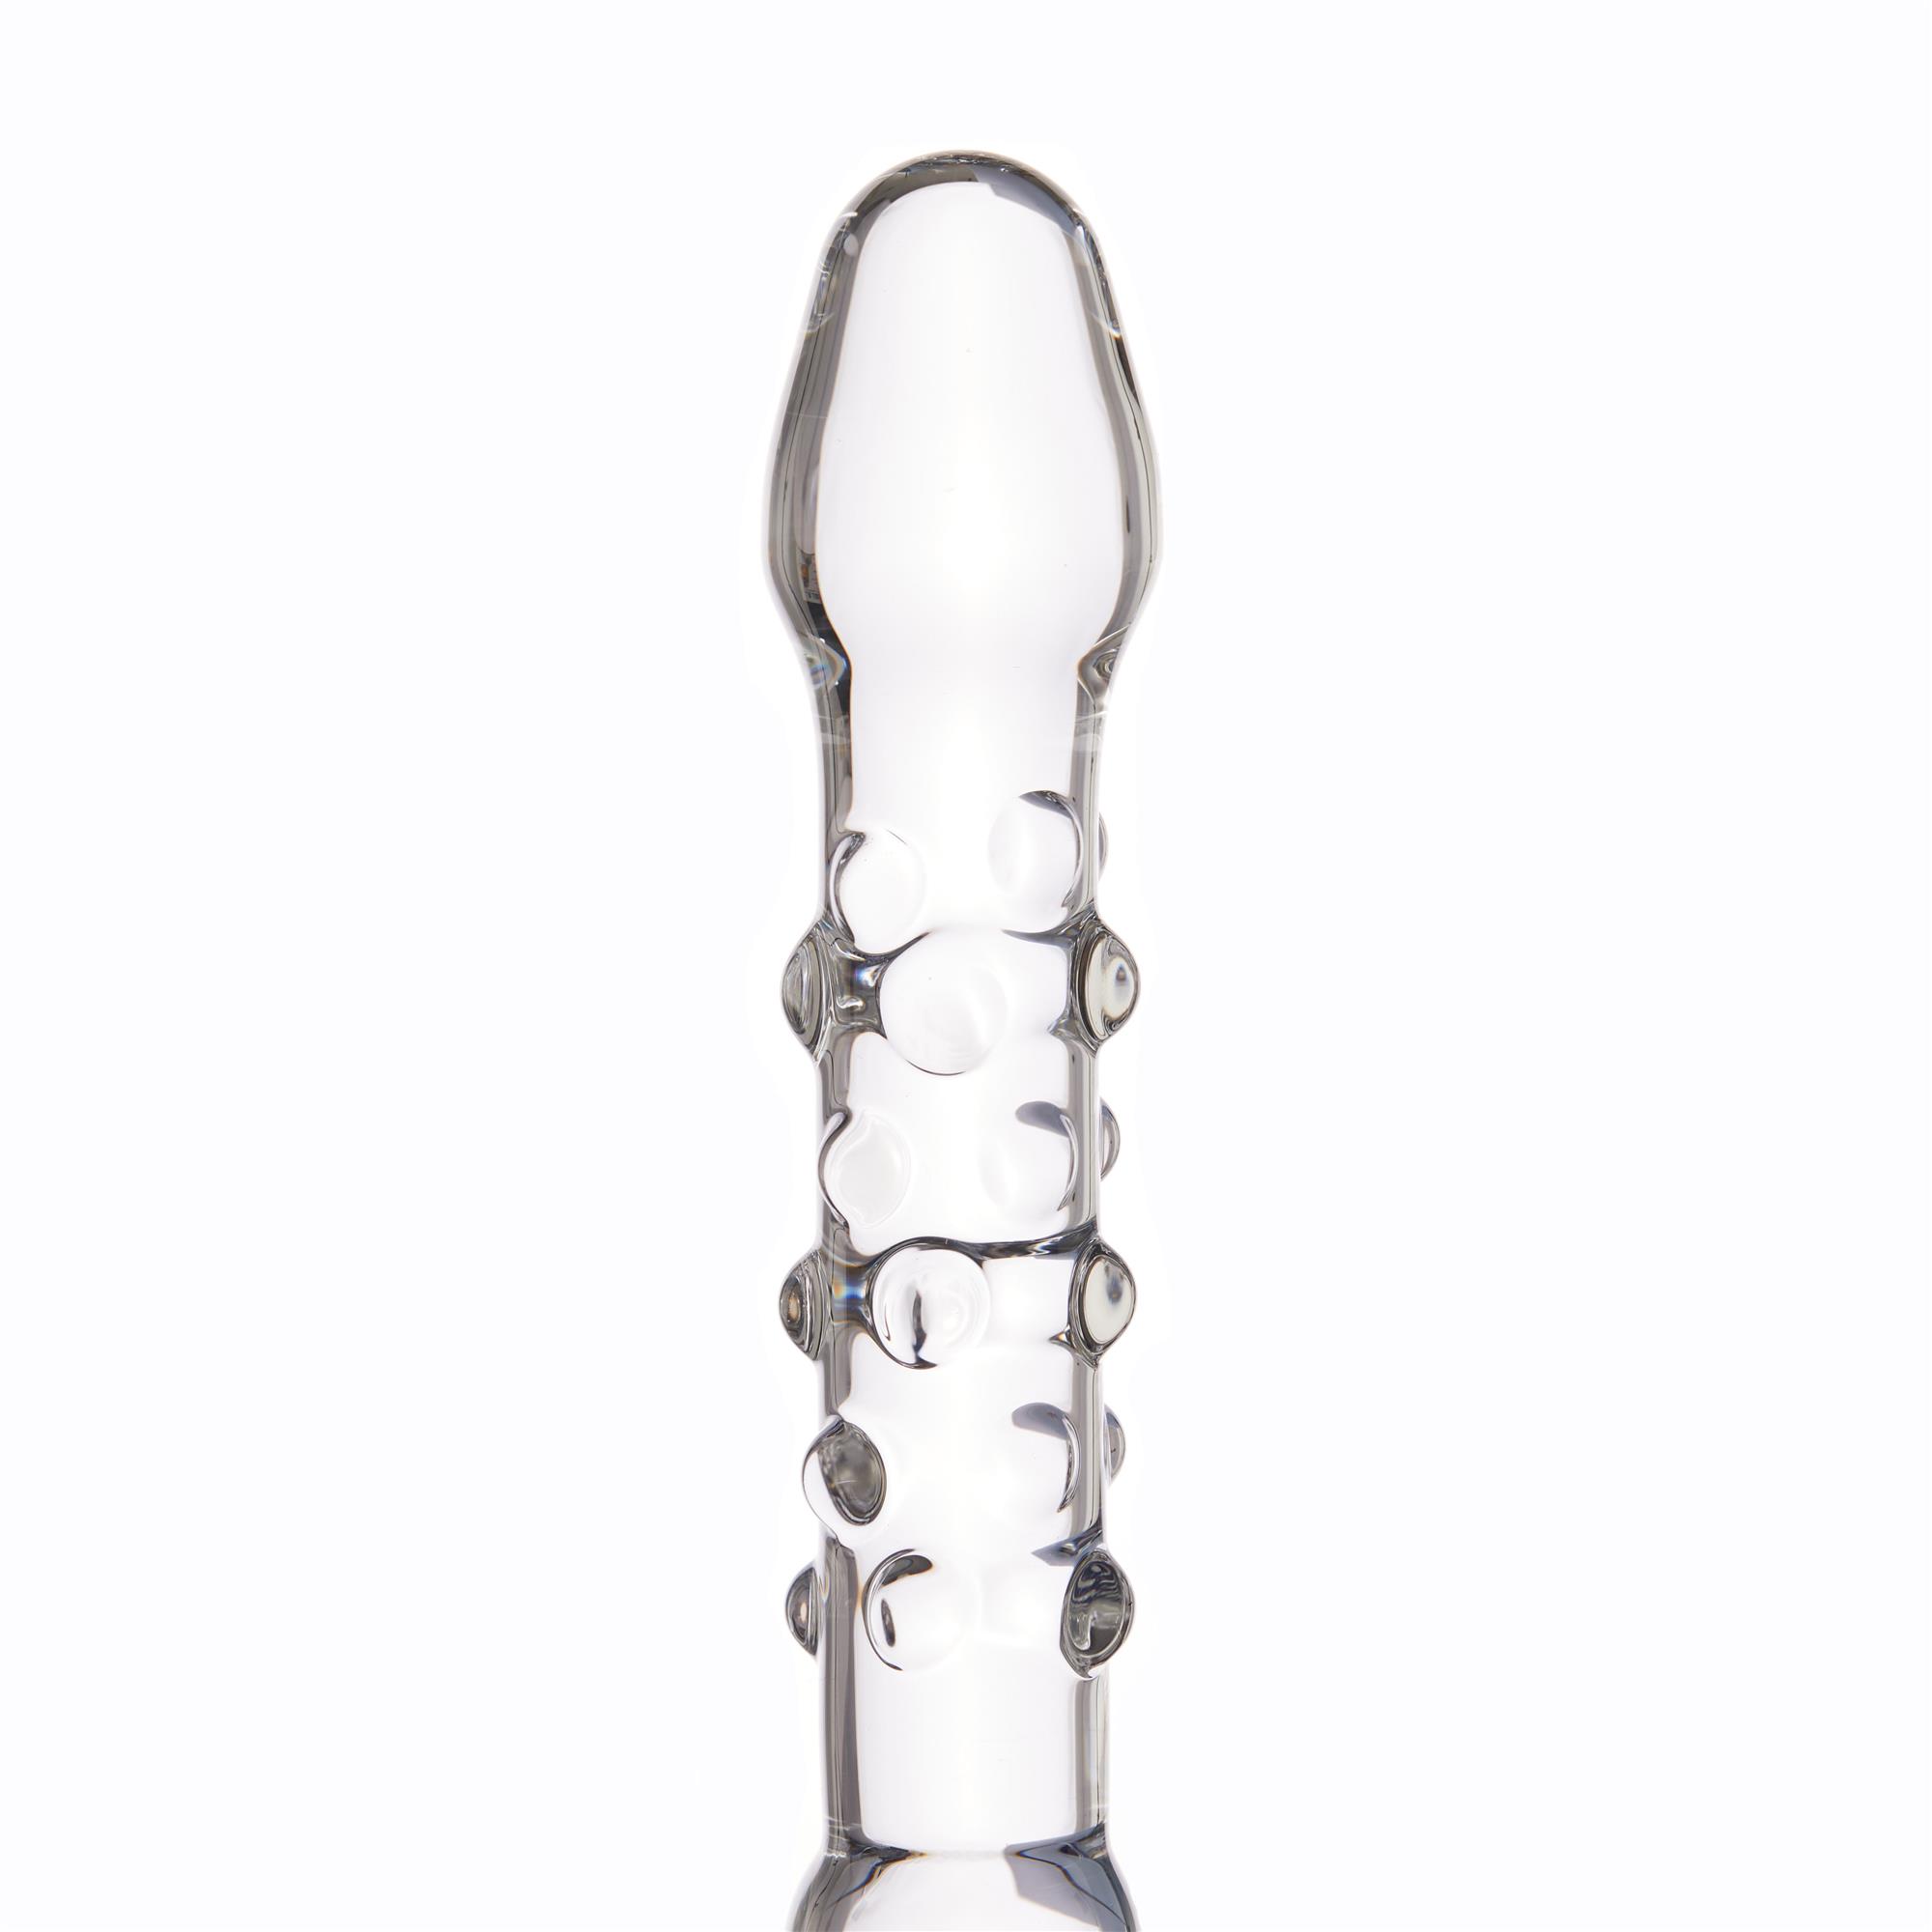 THE DON WAND GLASS DILDO